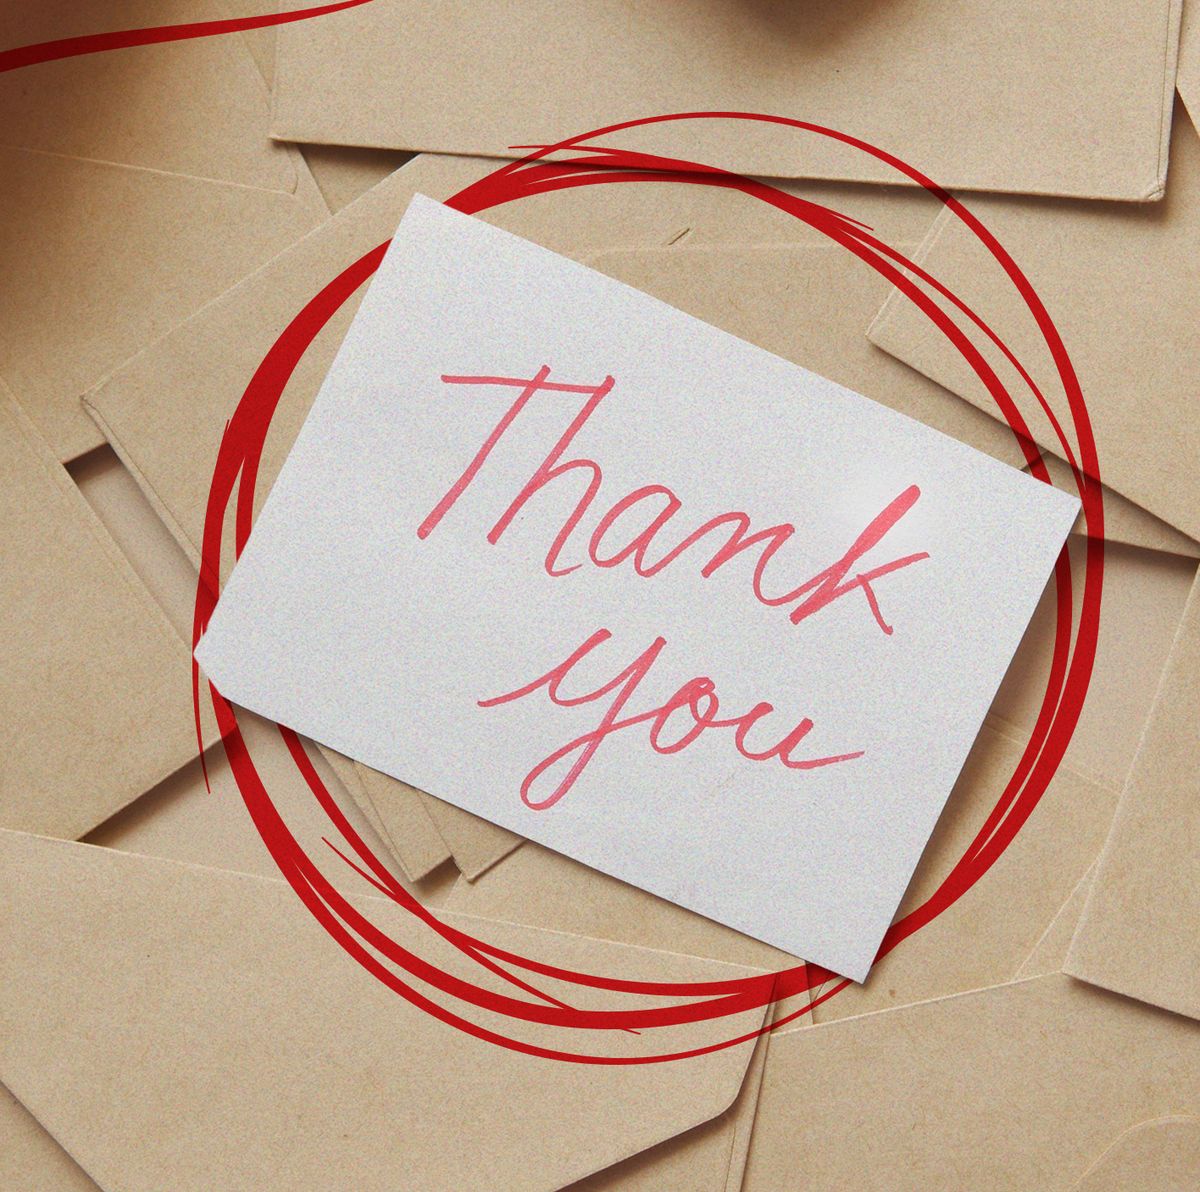 How to Write an Impactful Thank-You Card